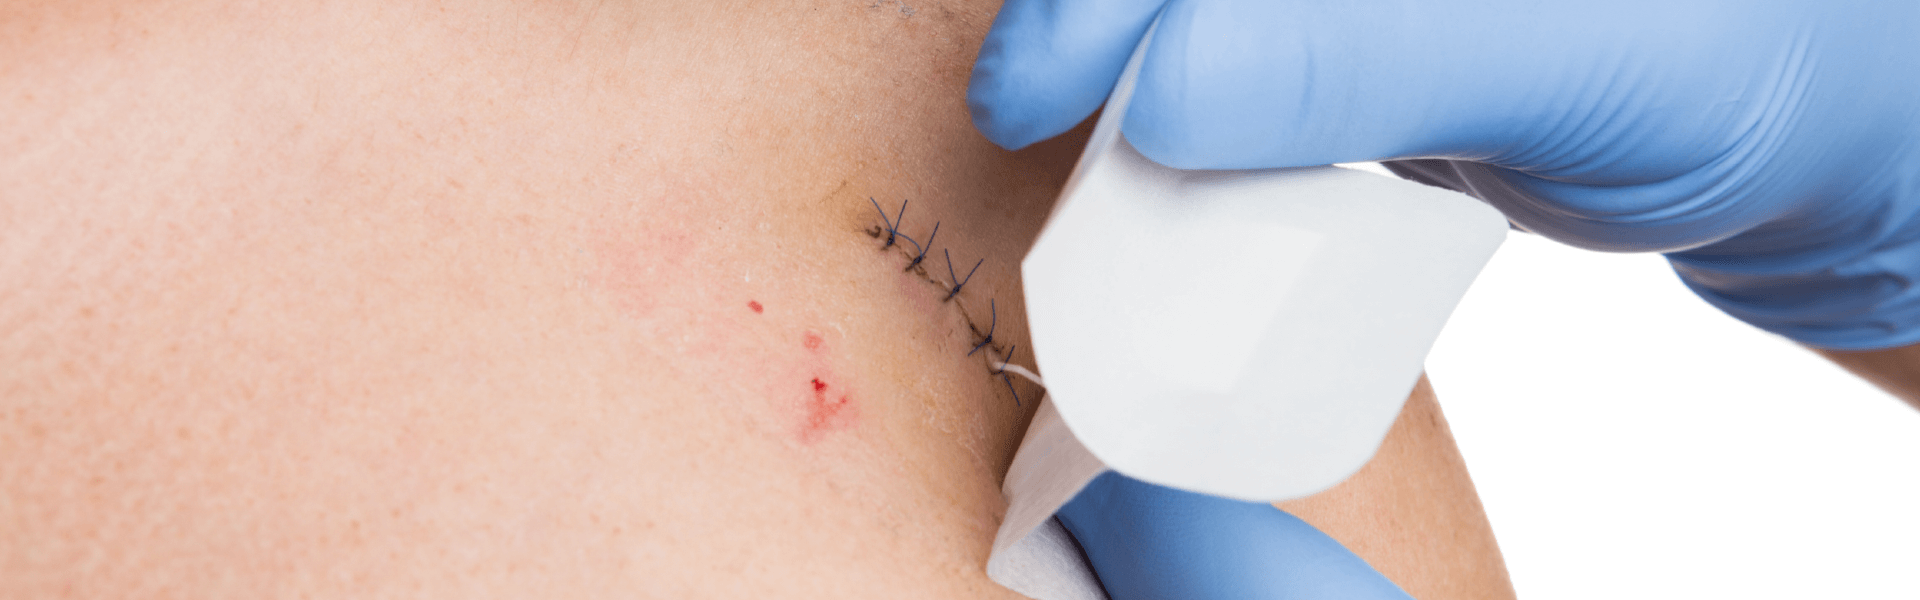 Suture Removal in Bangalore